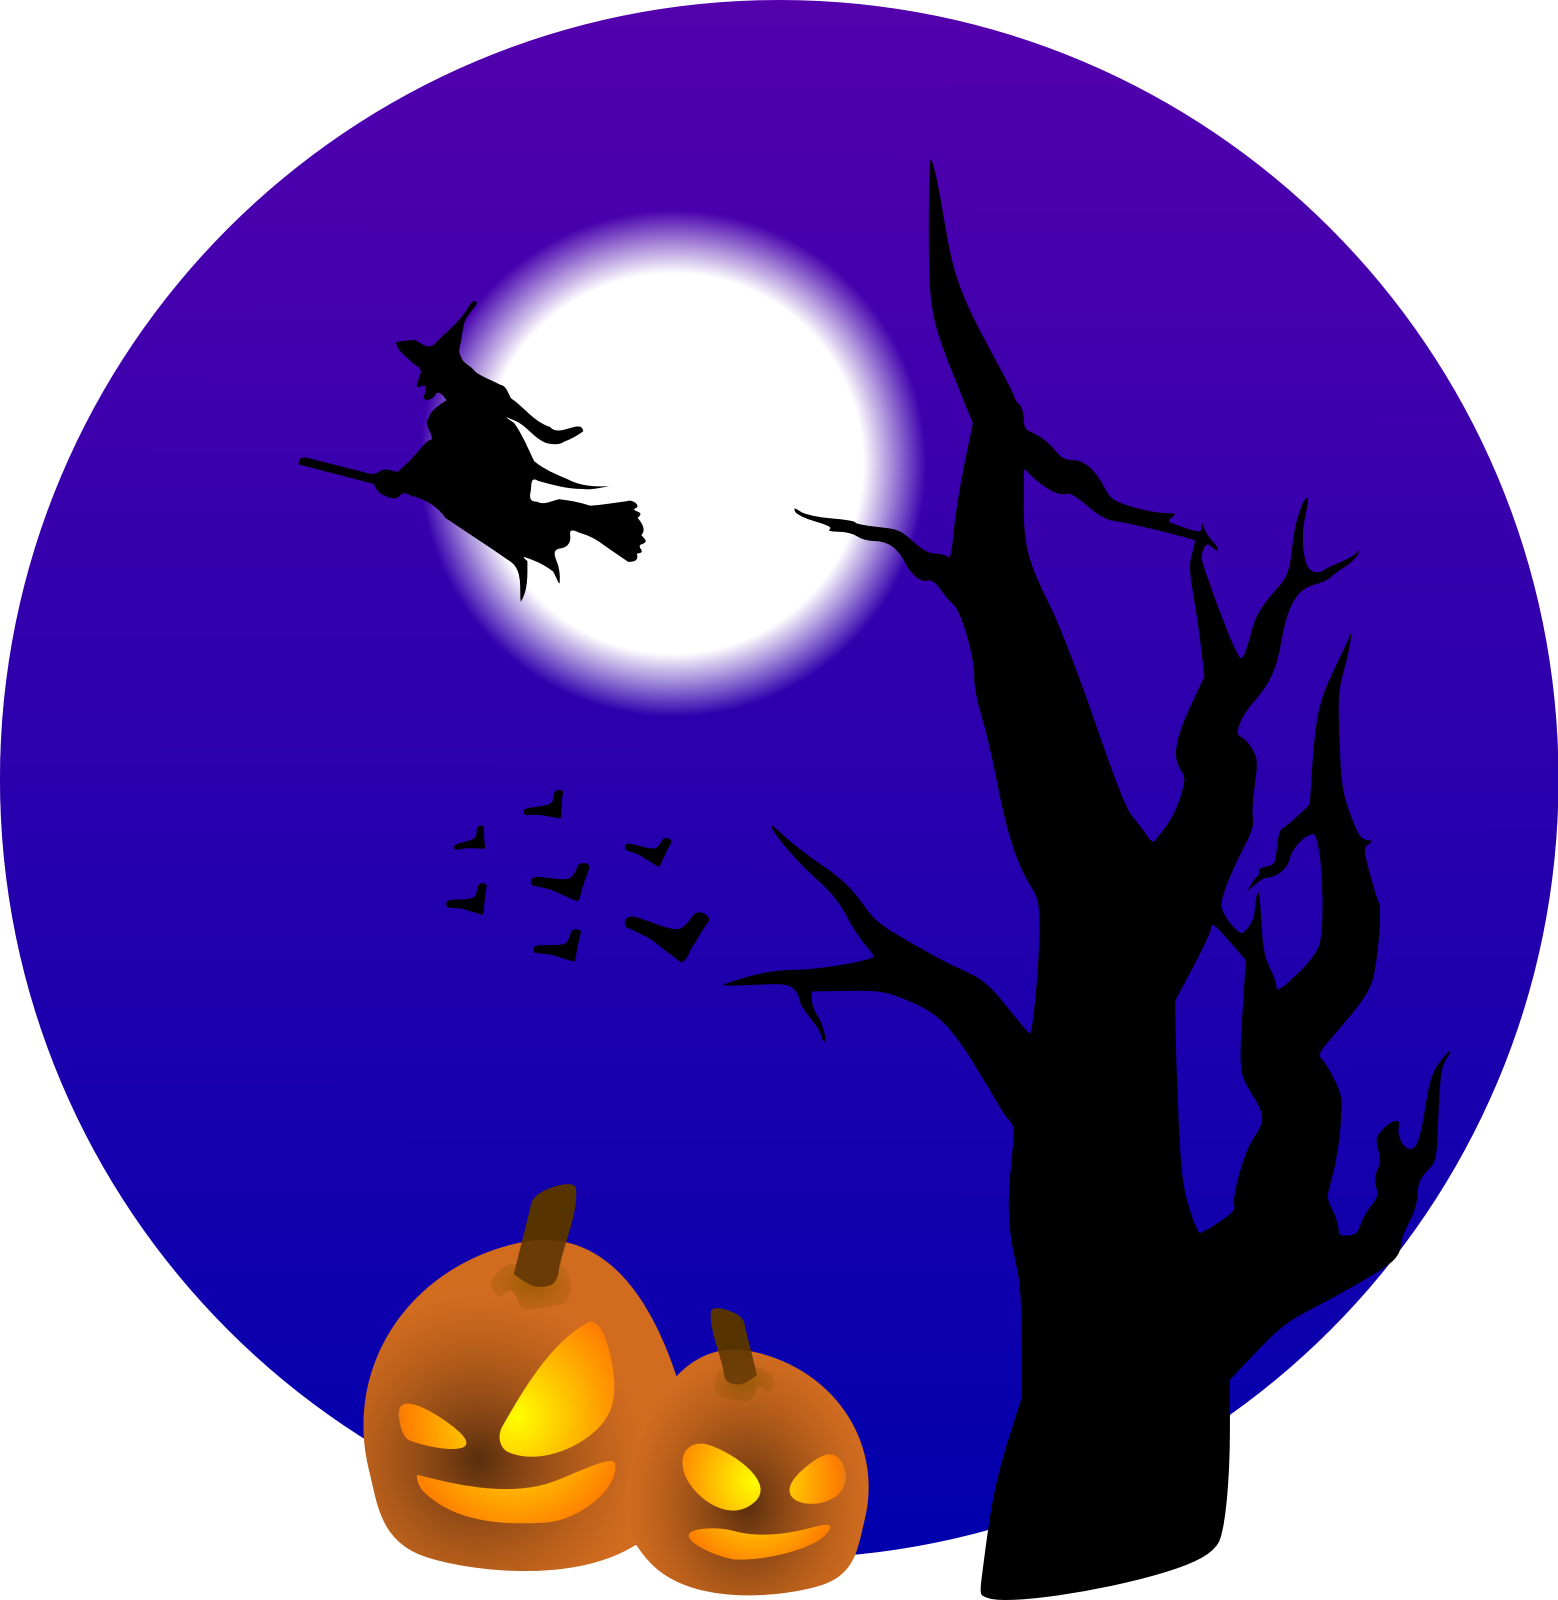 clipart of october - photo #22